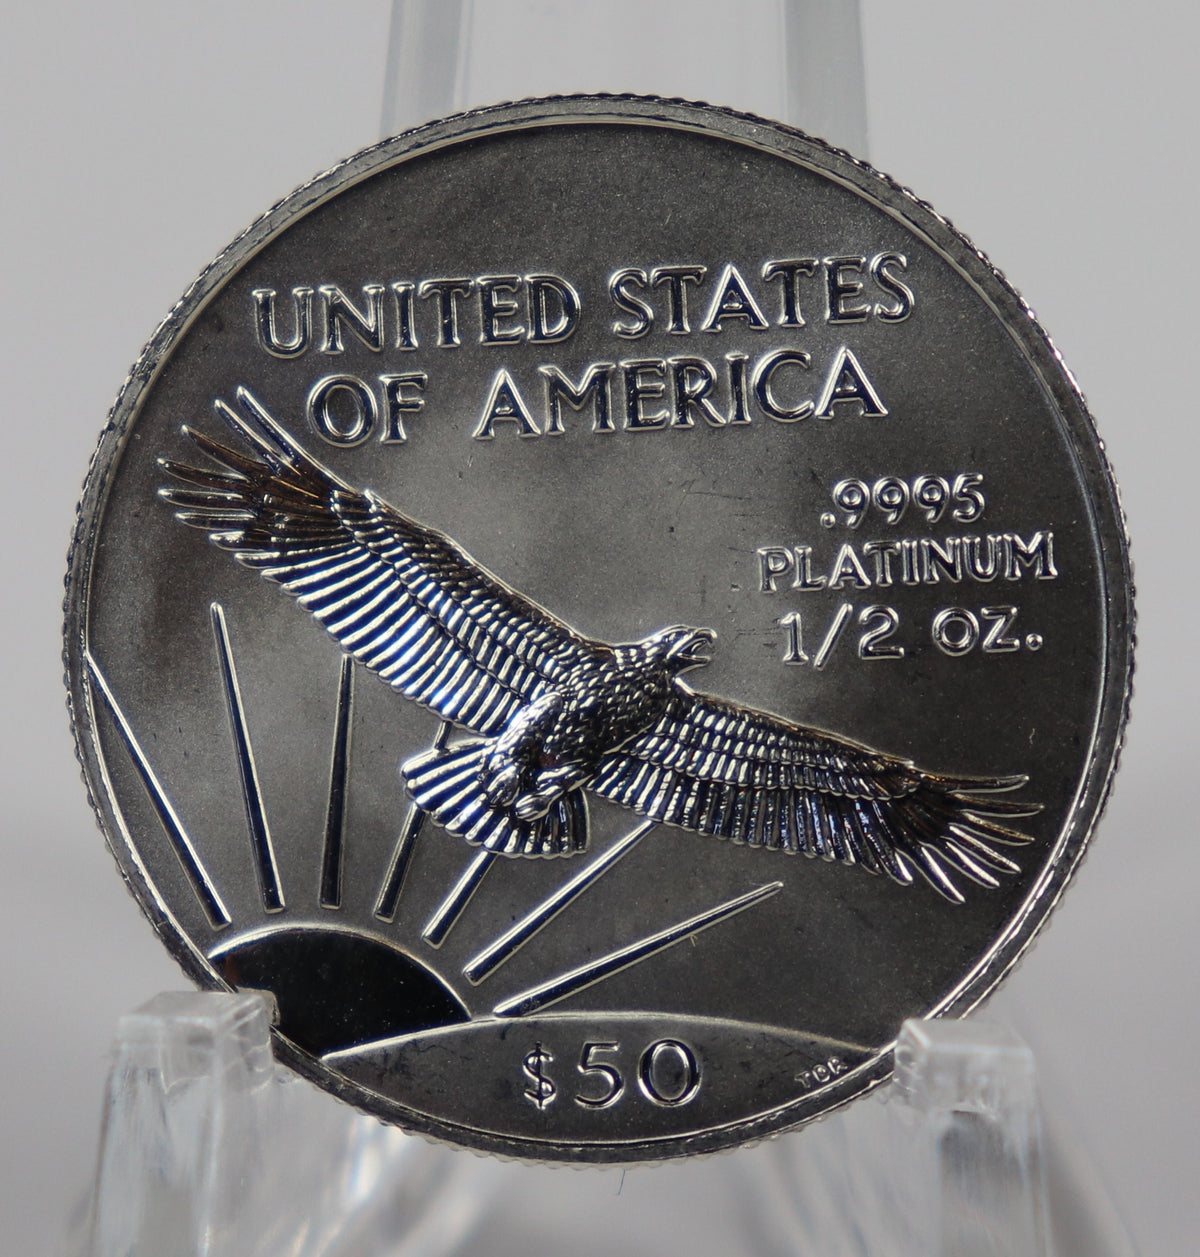 Platinum Coin from the U.S. Mint